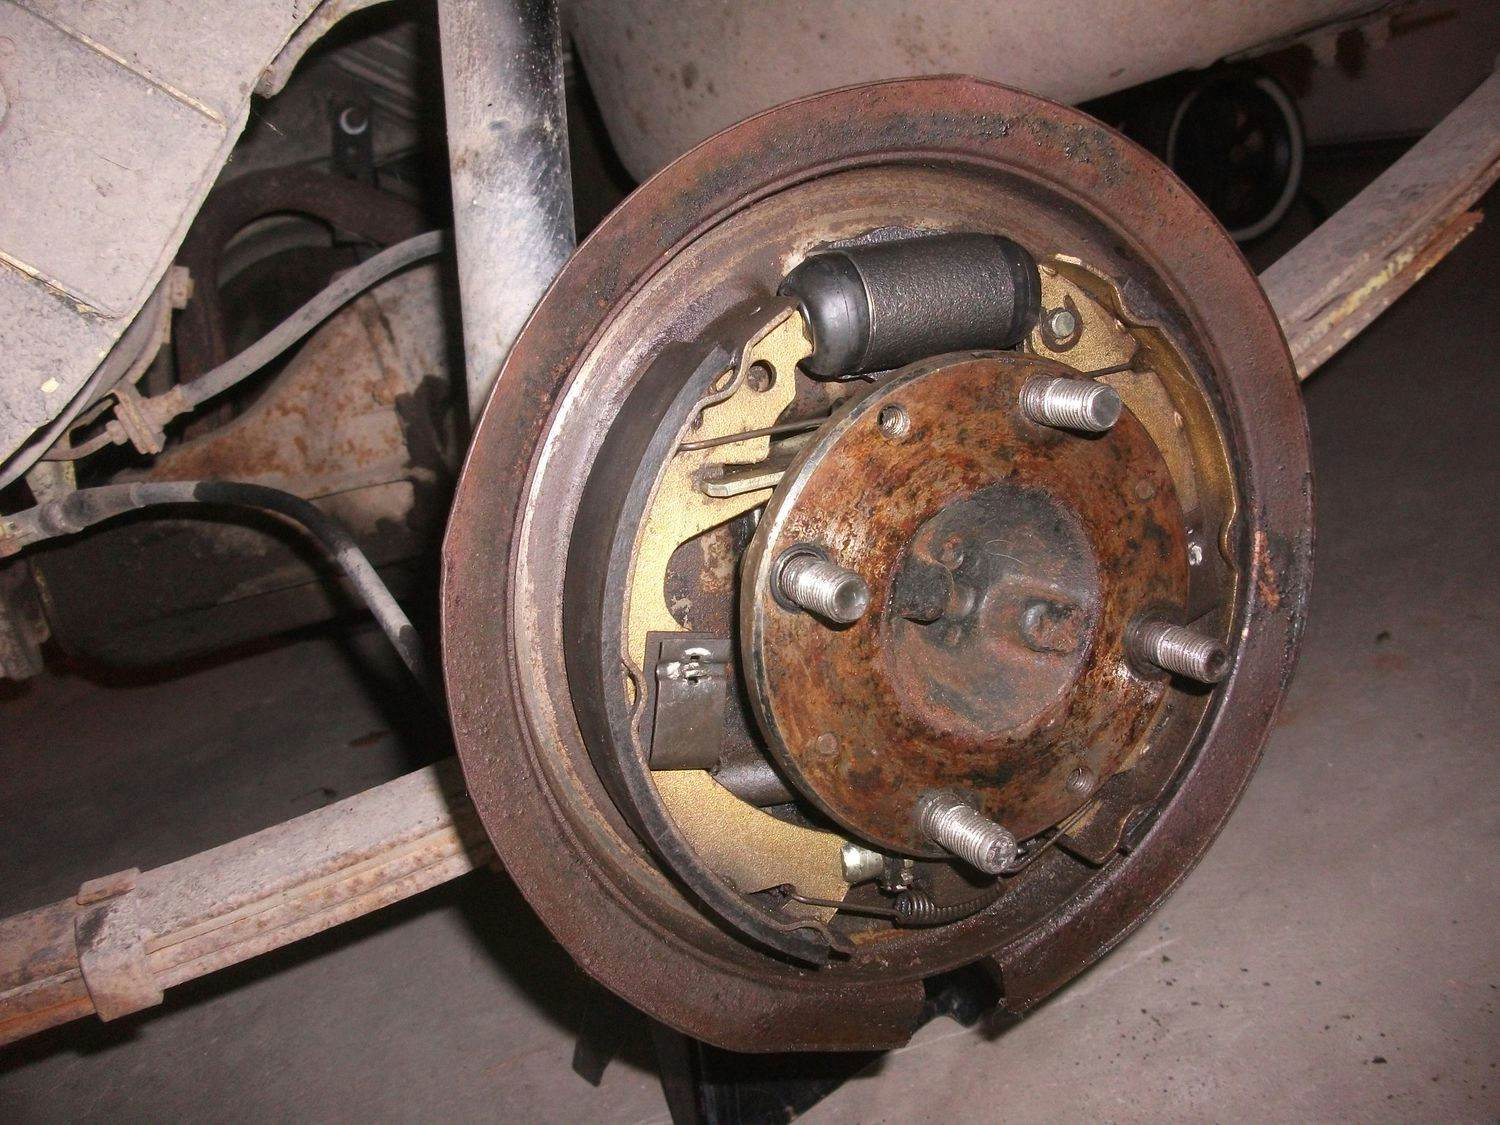 Drum brakes: How do they work, and what are their pros?